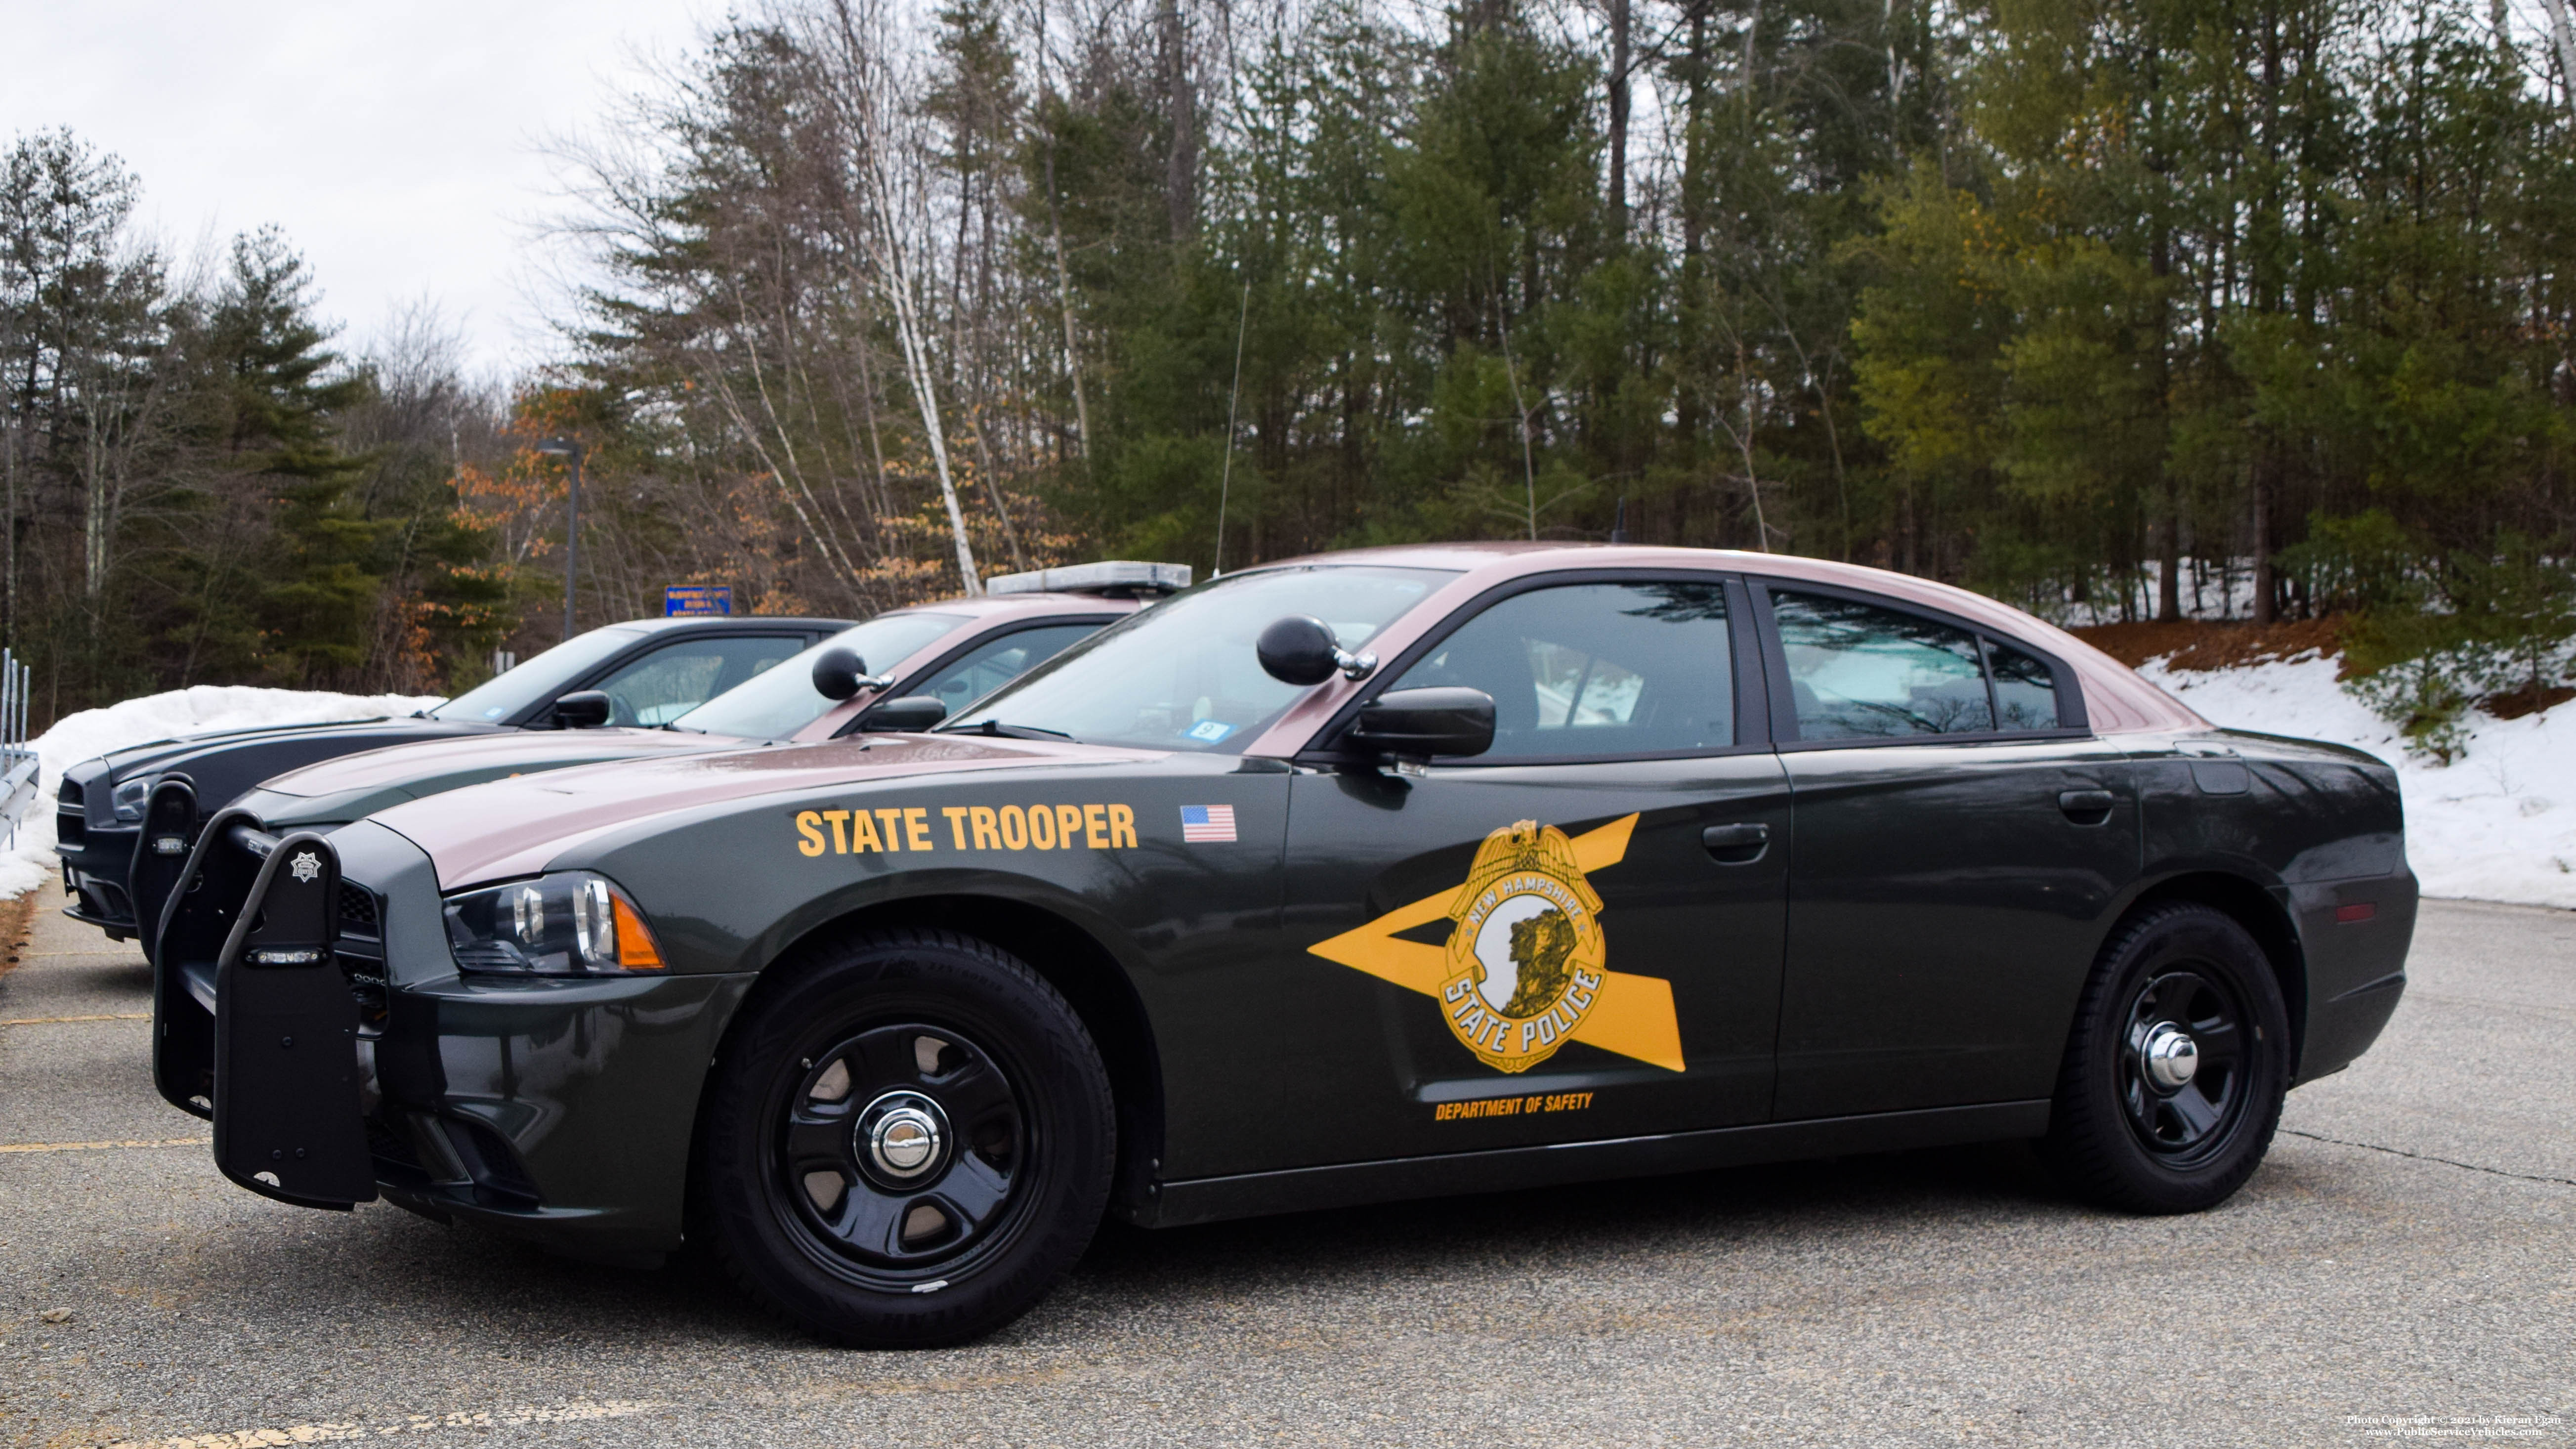 A photo  of New Hampshire State Police
            Cruiser 401, a 2011-2014 Dodge Charger             taken by Kieran Egan